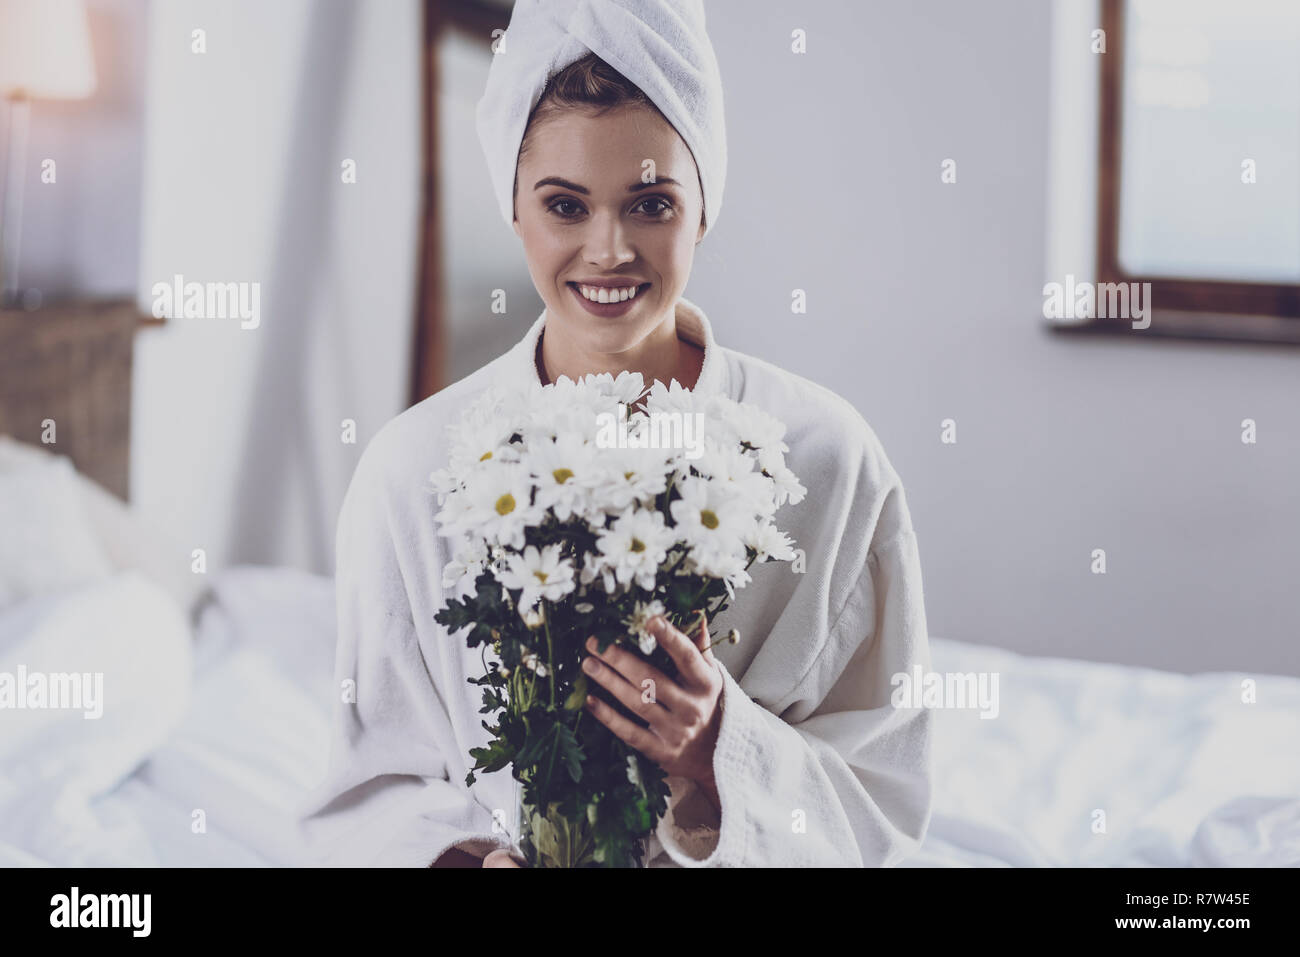 Young woman with bouquet of flowers Stock Photo